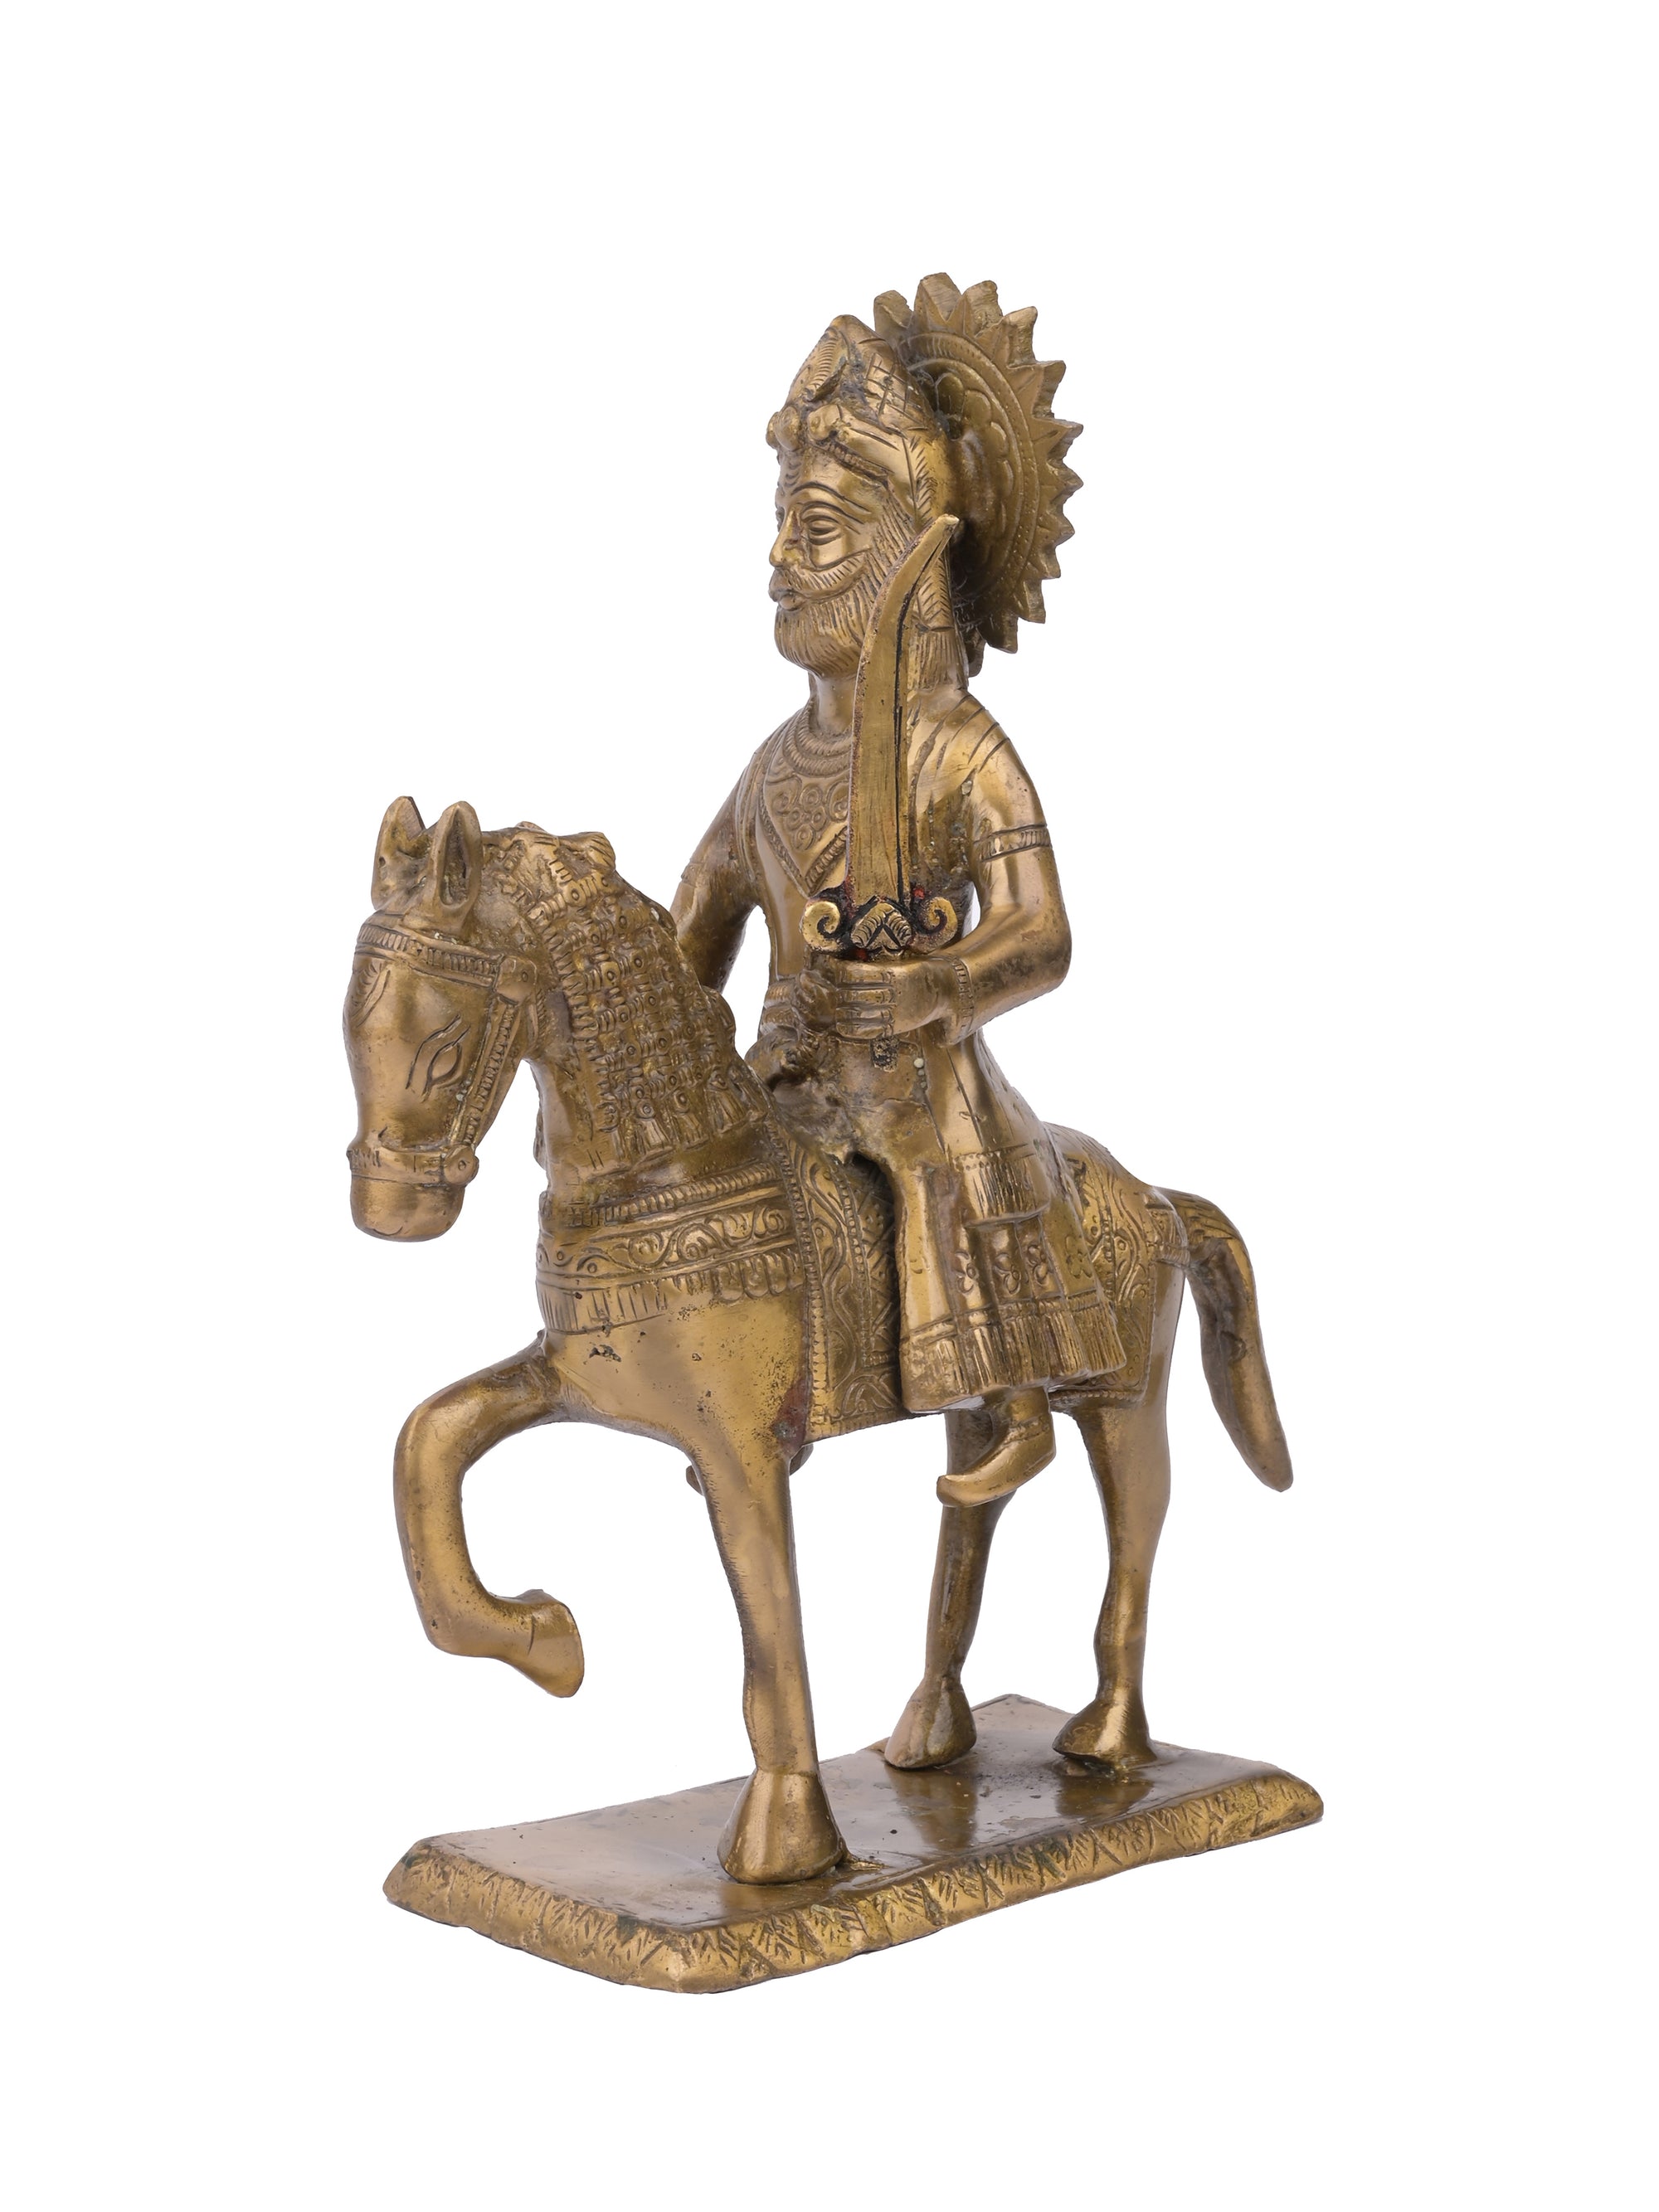 Antique Brass Statue of Maharaja Agrasen riding horse with a open sword in hand - The Heritage Artifacts